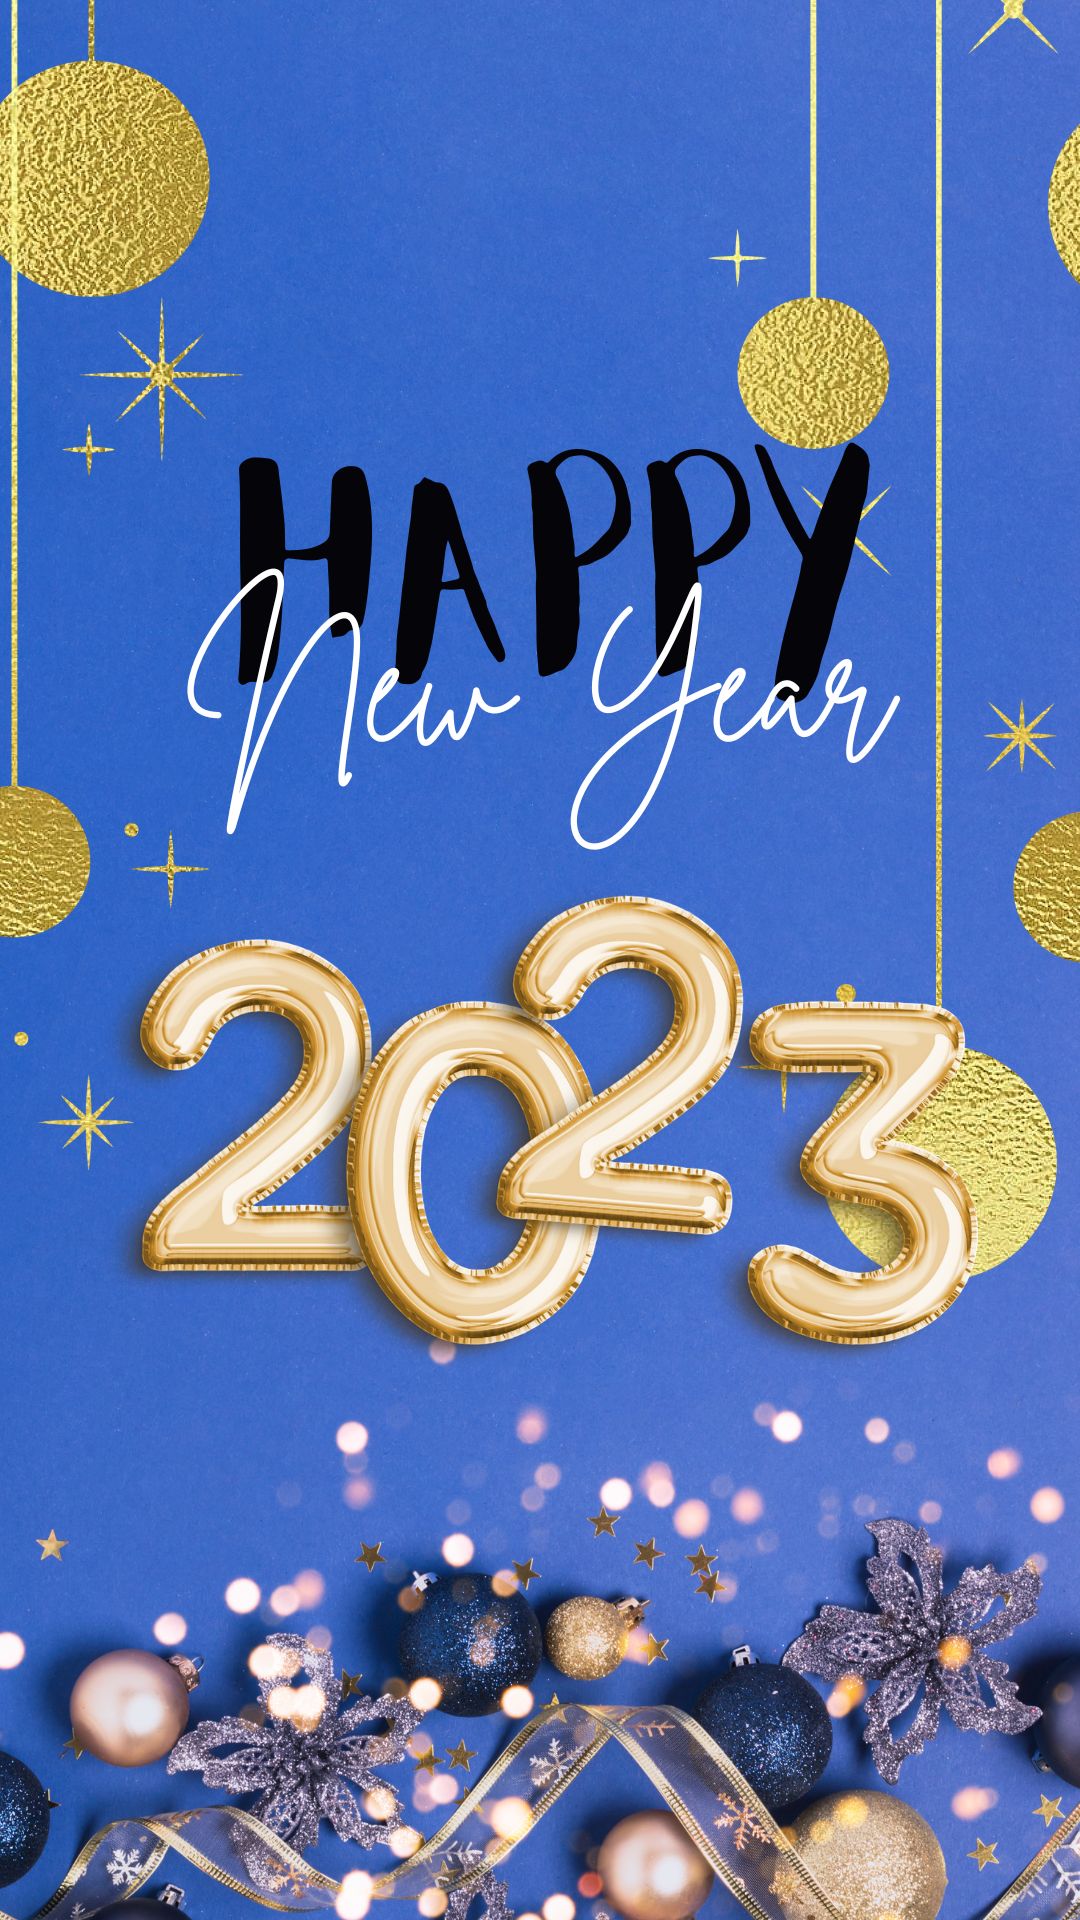 iPhone 14 Happy New Year 2023 Wallpaper Download 2022